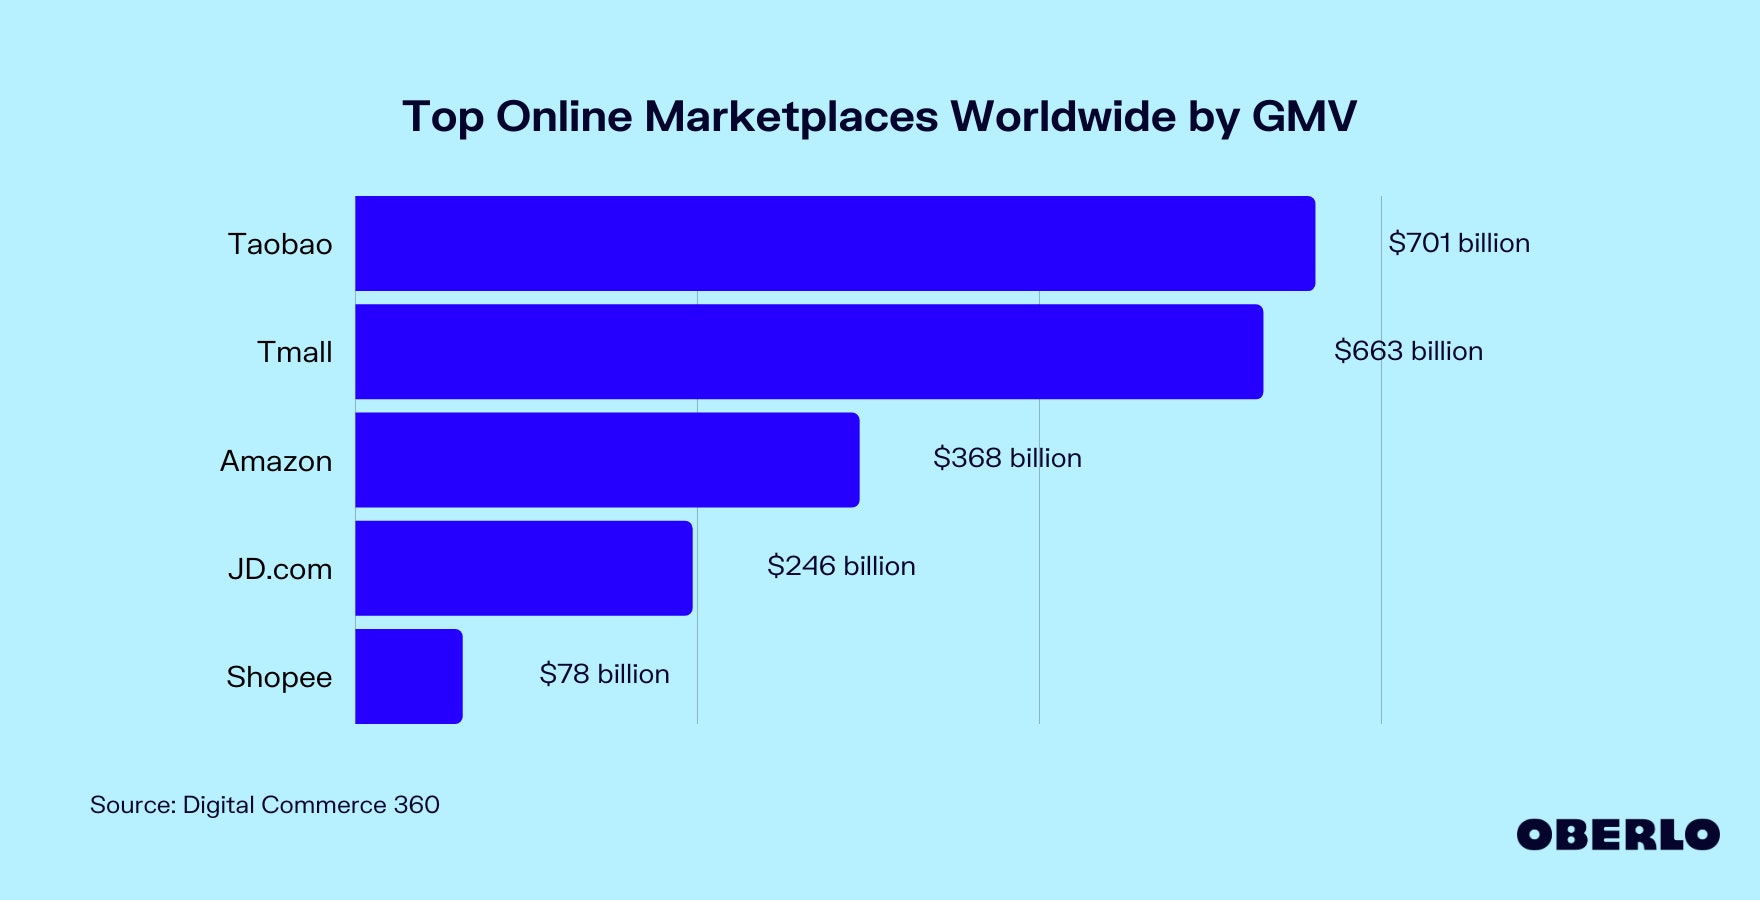 Chart of the Top Online Marketplaces Worldwide by GMV